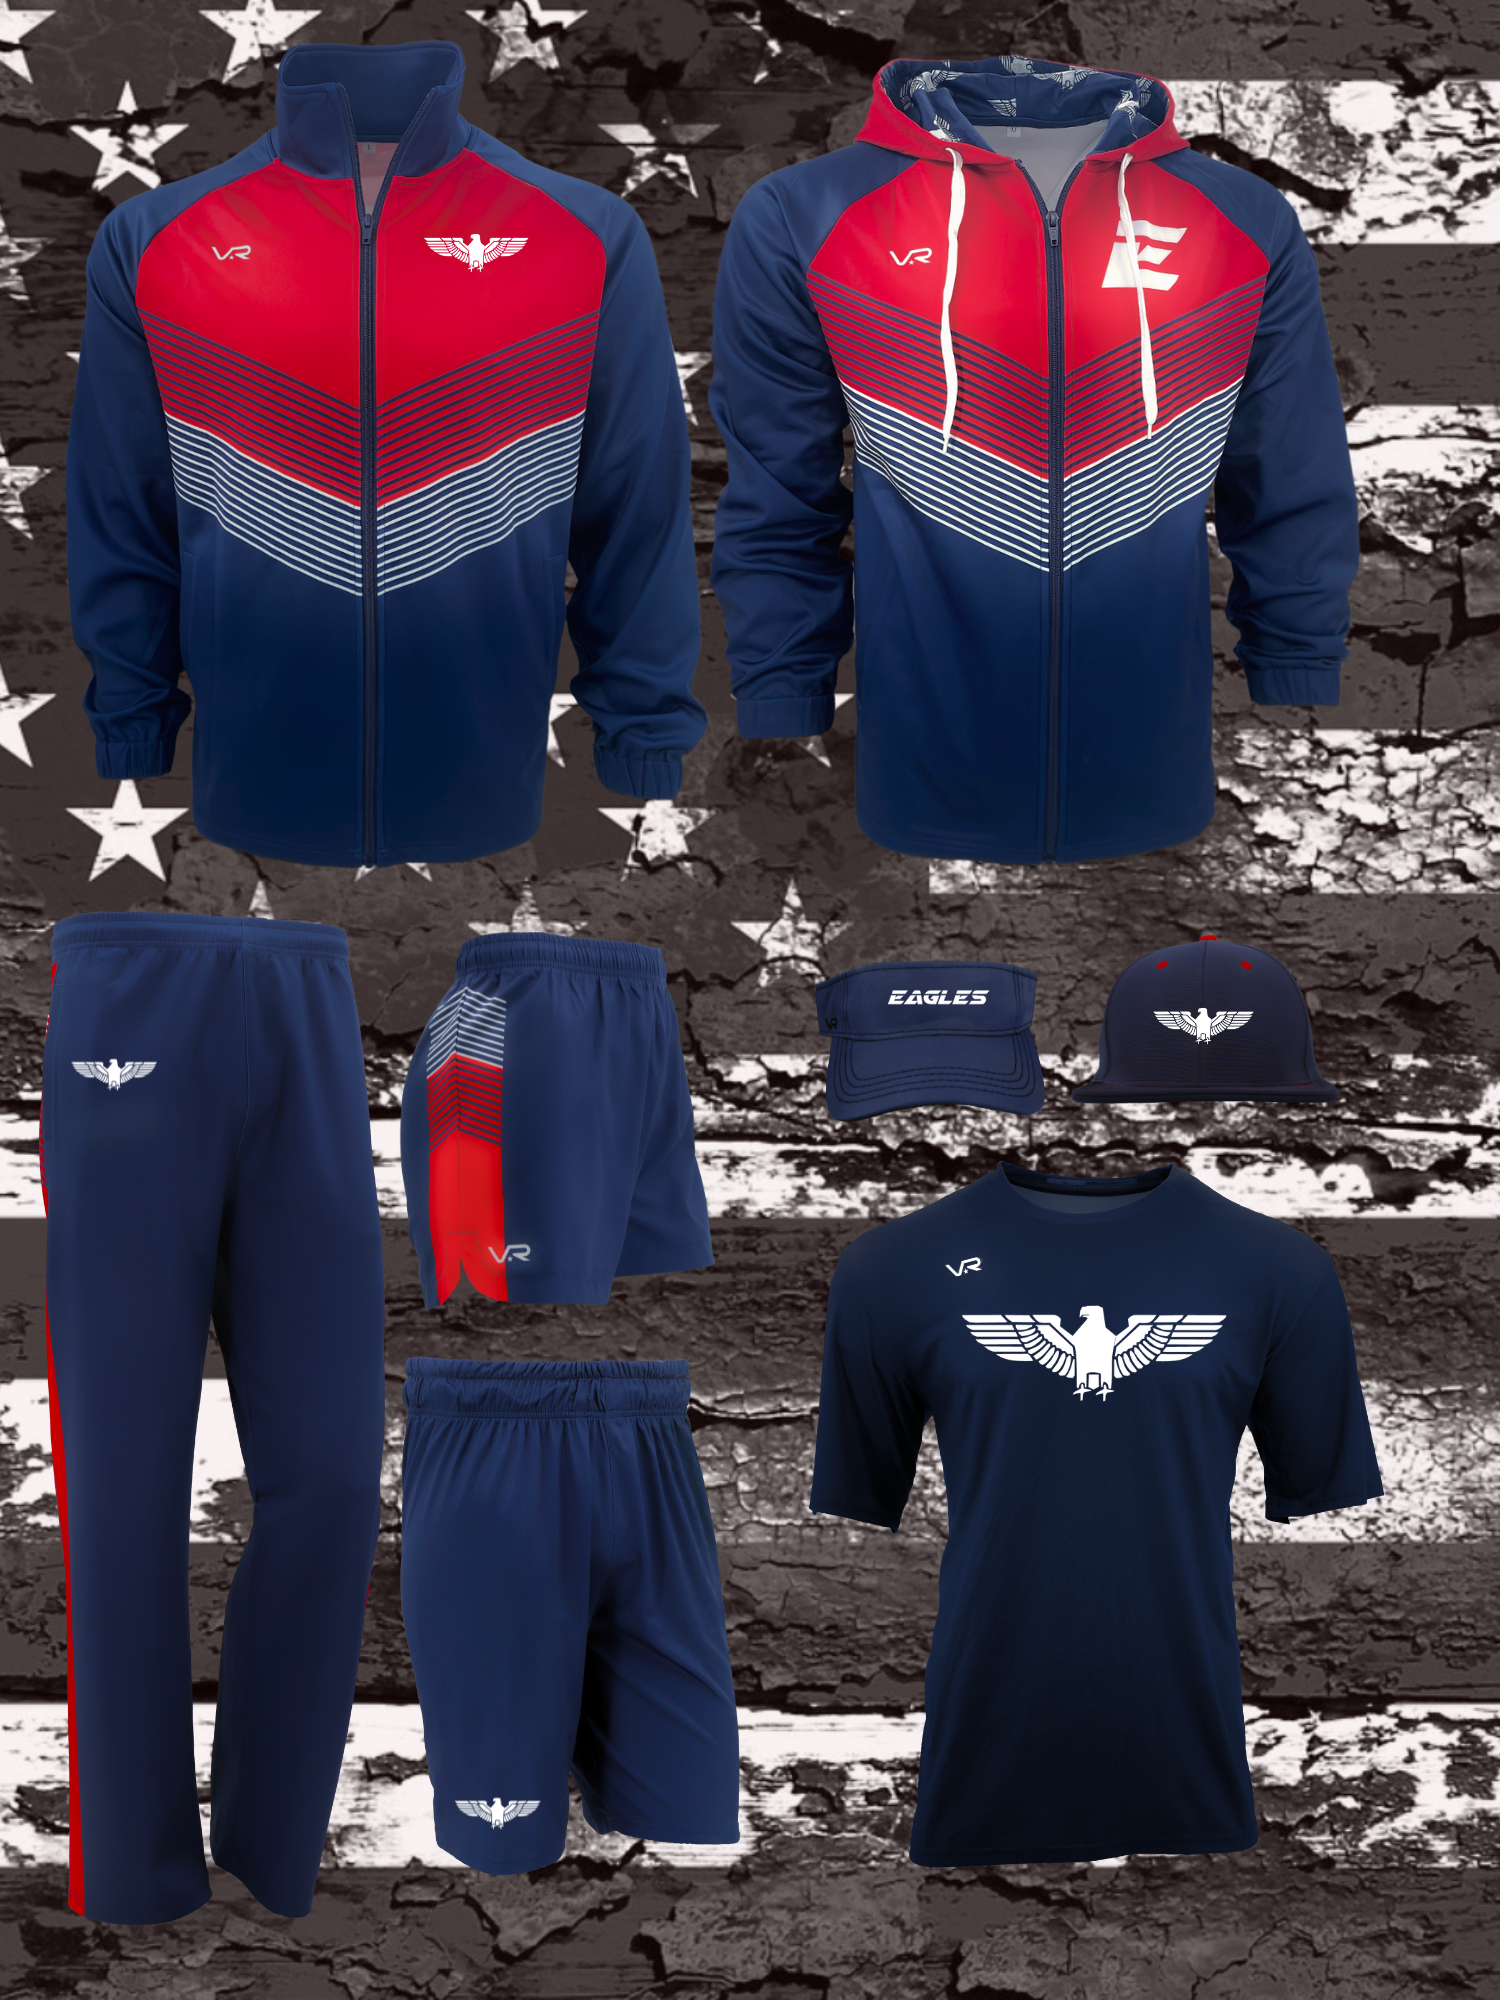 Bronze Team Package for Baseball Teams showing custom uniforms and Bat Pack